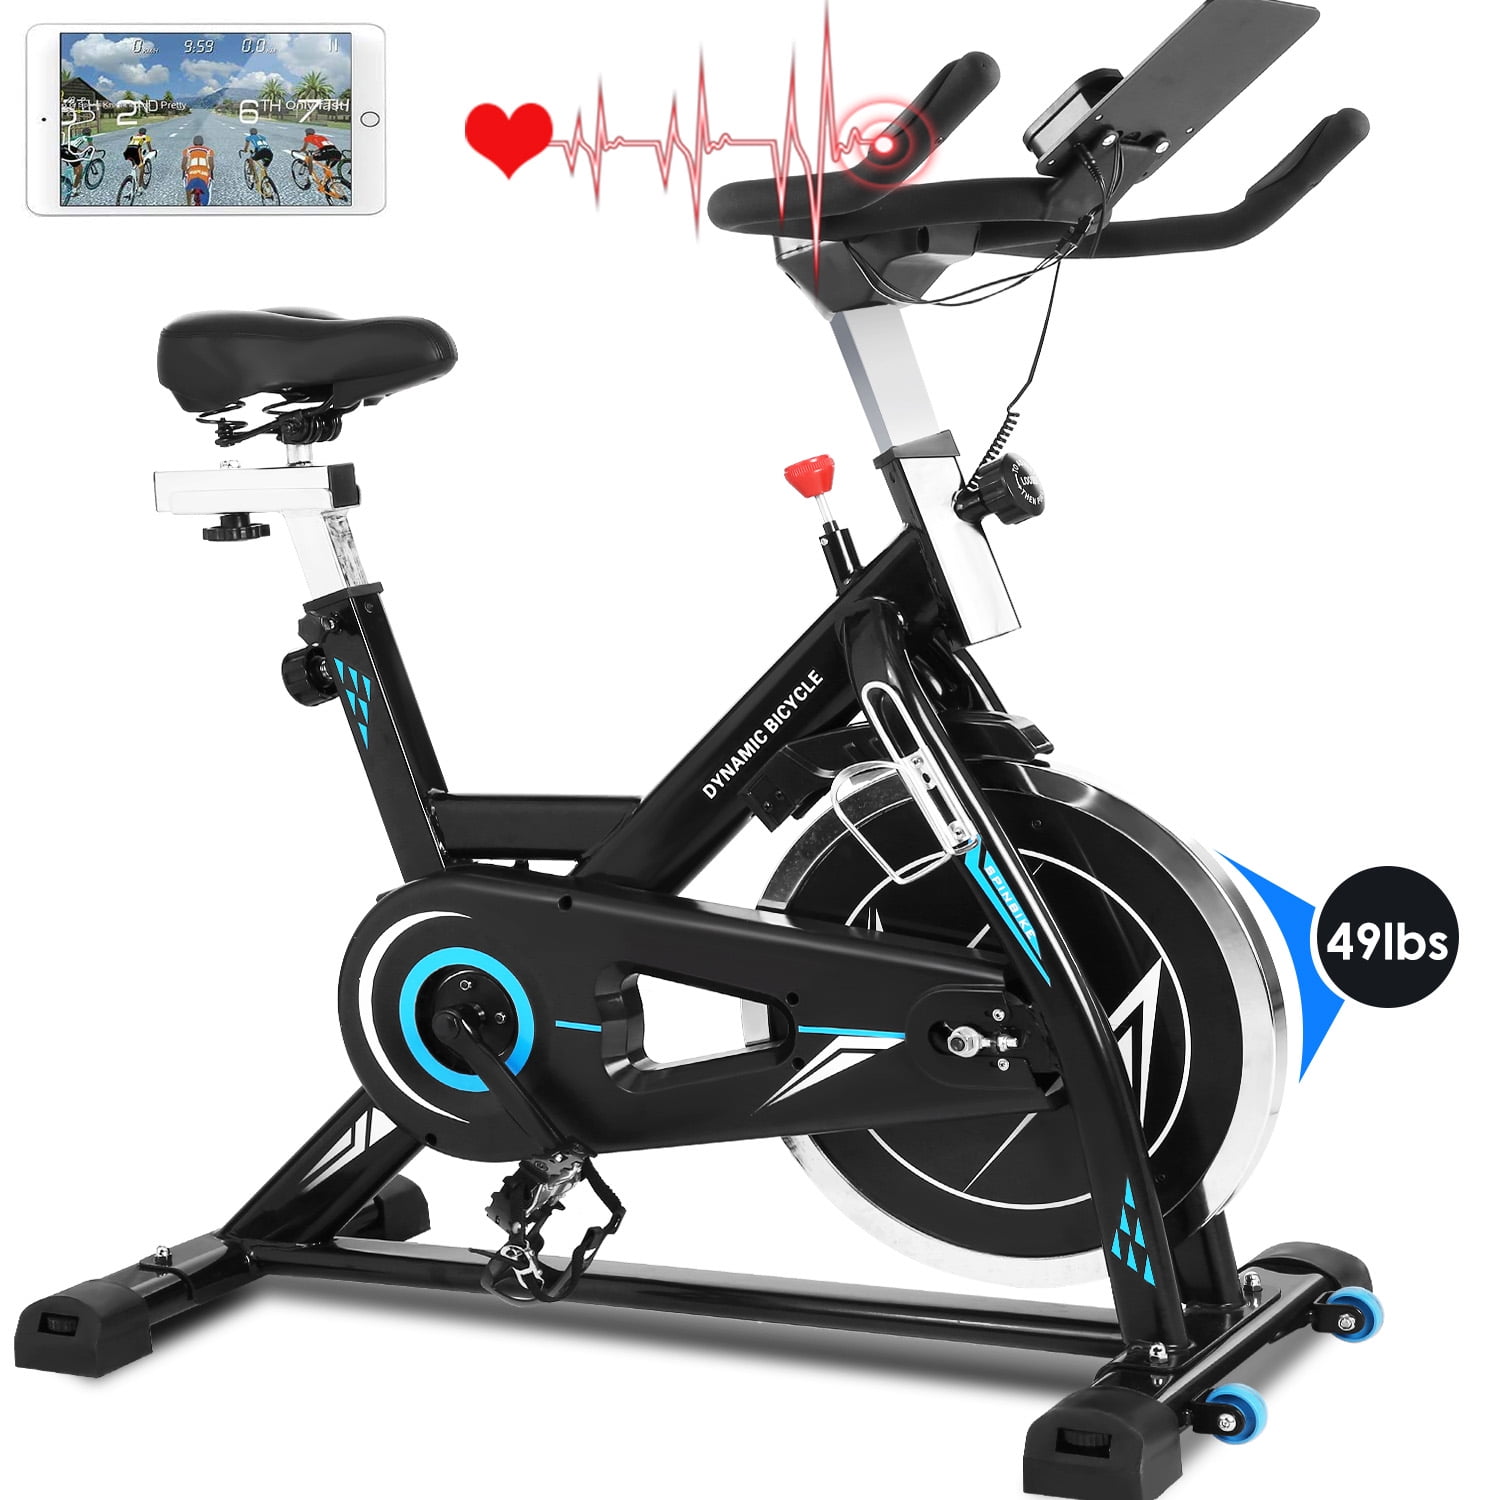 GEEMAX bluetooth Sport Exercise Bike Gym Bicycle Cycling Cardio Fitnes 